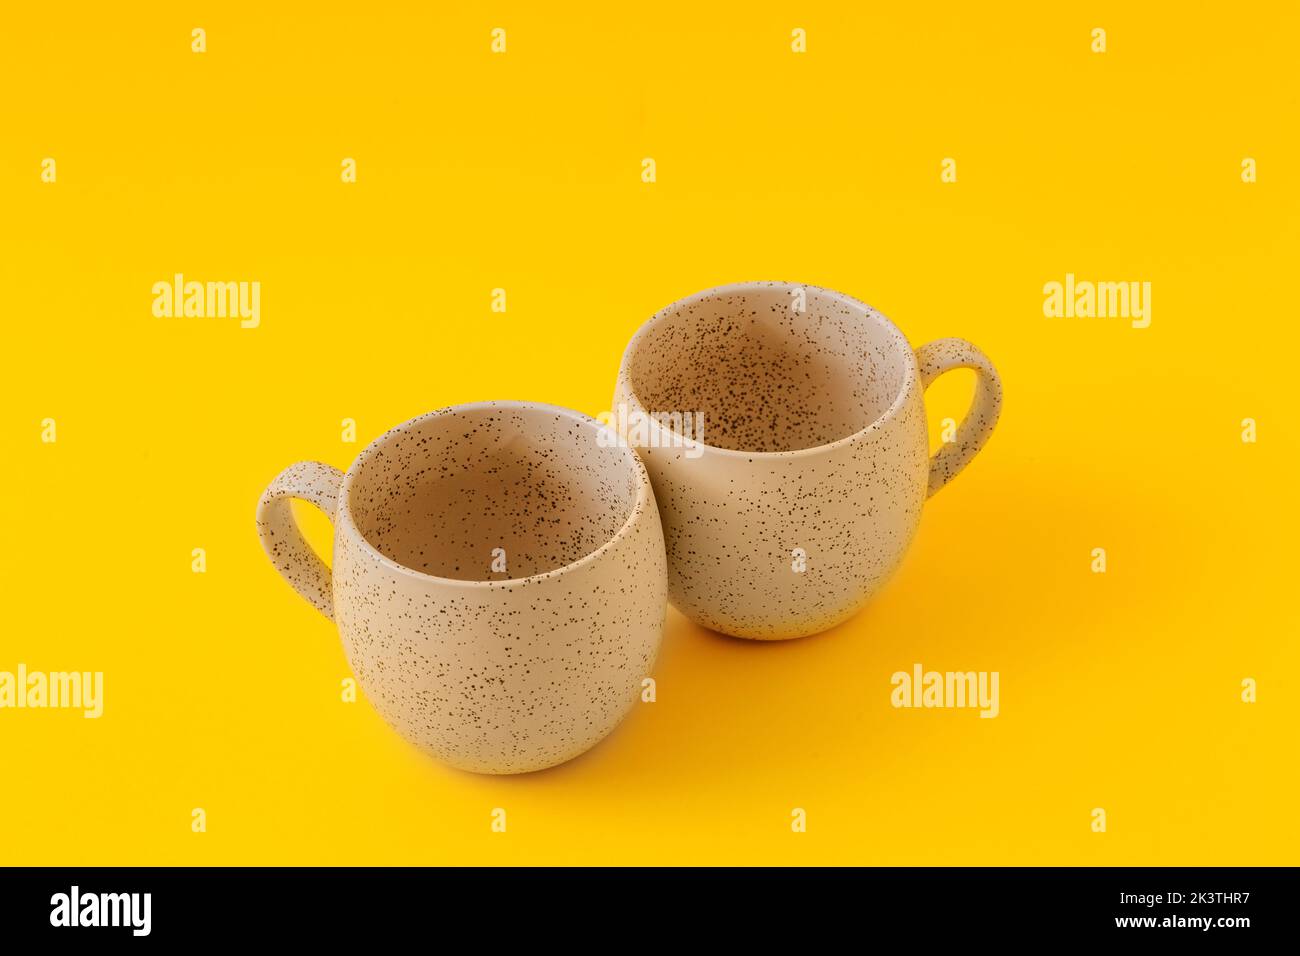 Two empty ceramic cups on a yellow background, copy space. Stock Photo